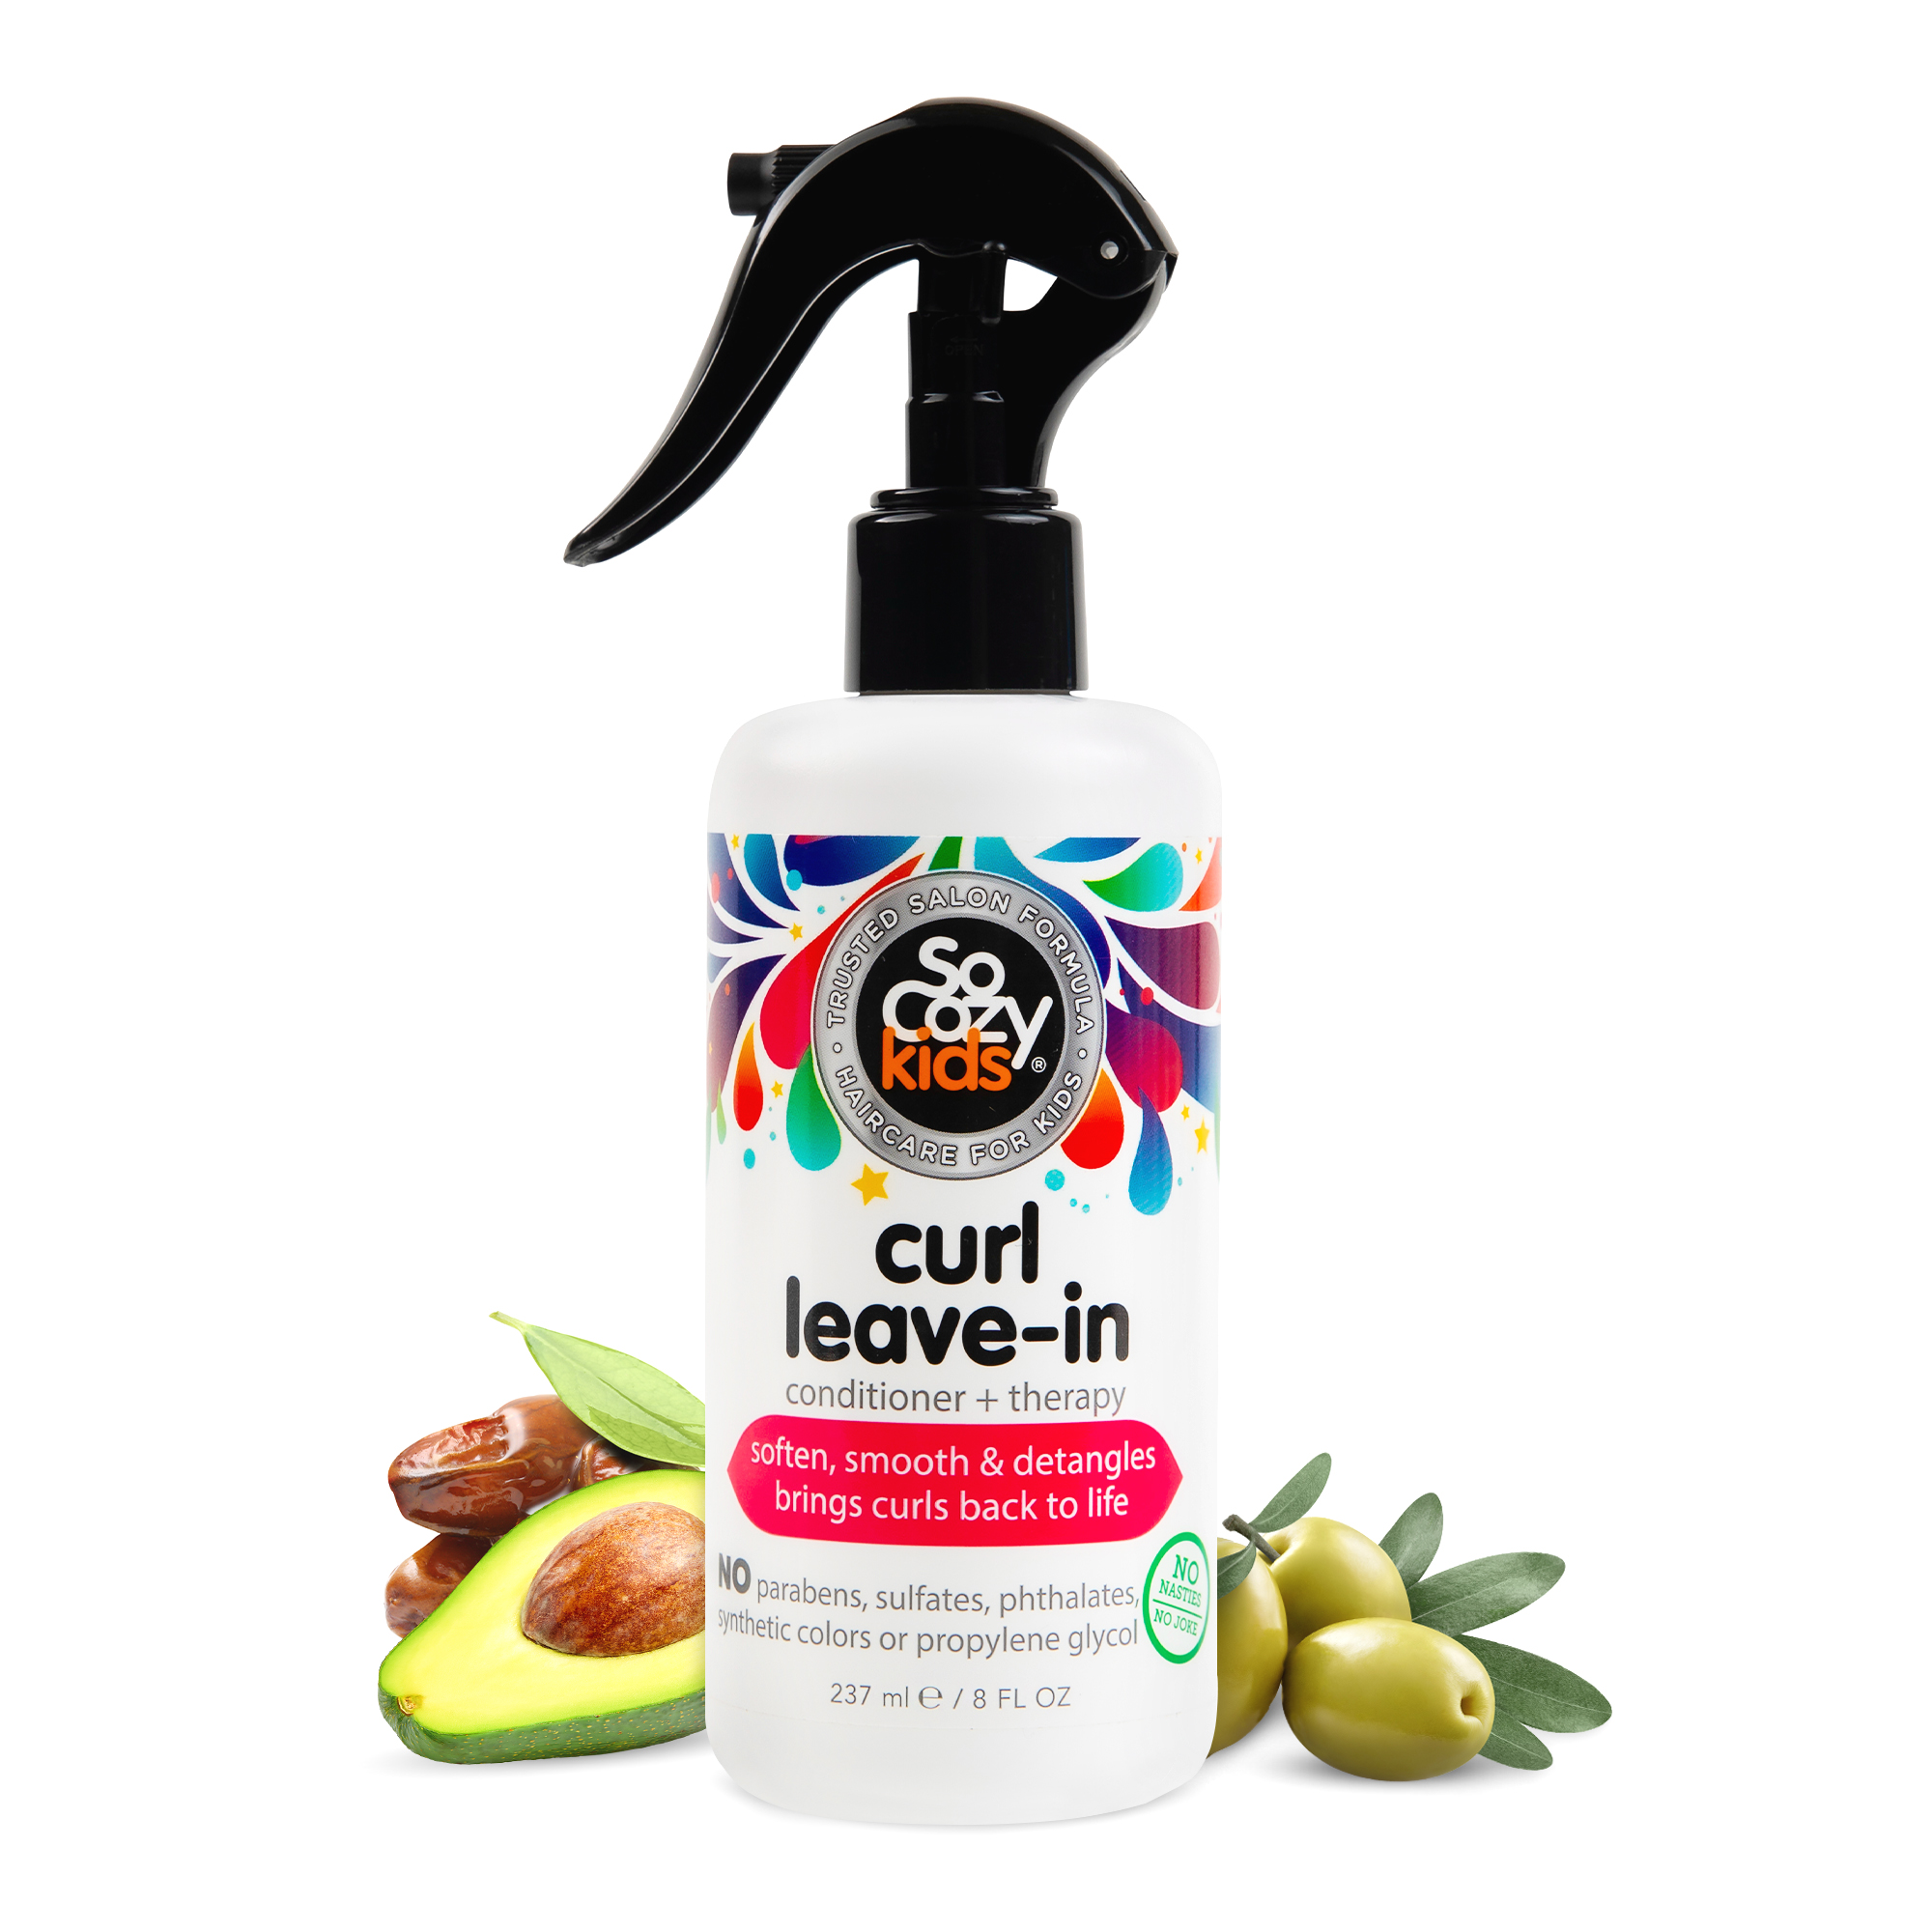 SoCozy Kid's Curl Leave-in Spray Conditioner with Olive & Jojoba Oil, for All Curl Types, 8 oz - image 1 of 12